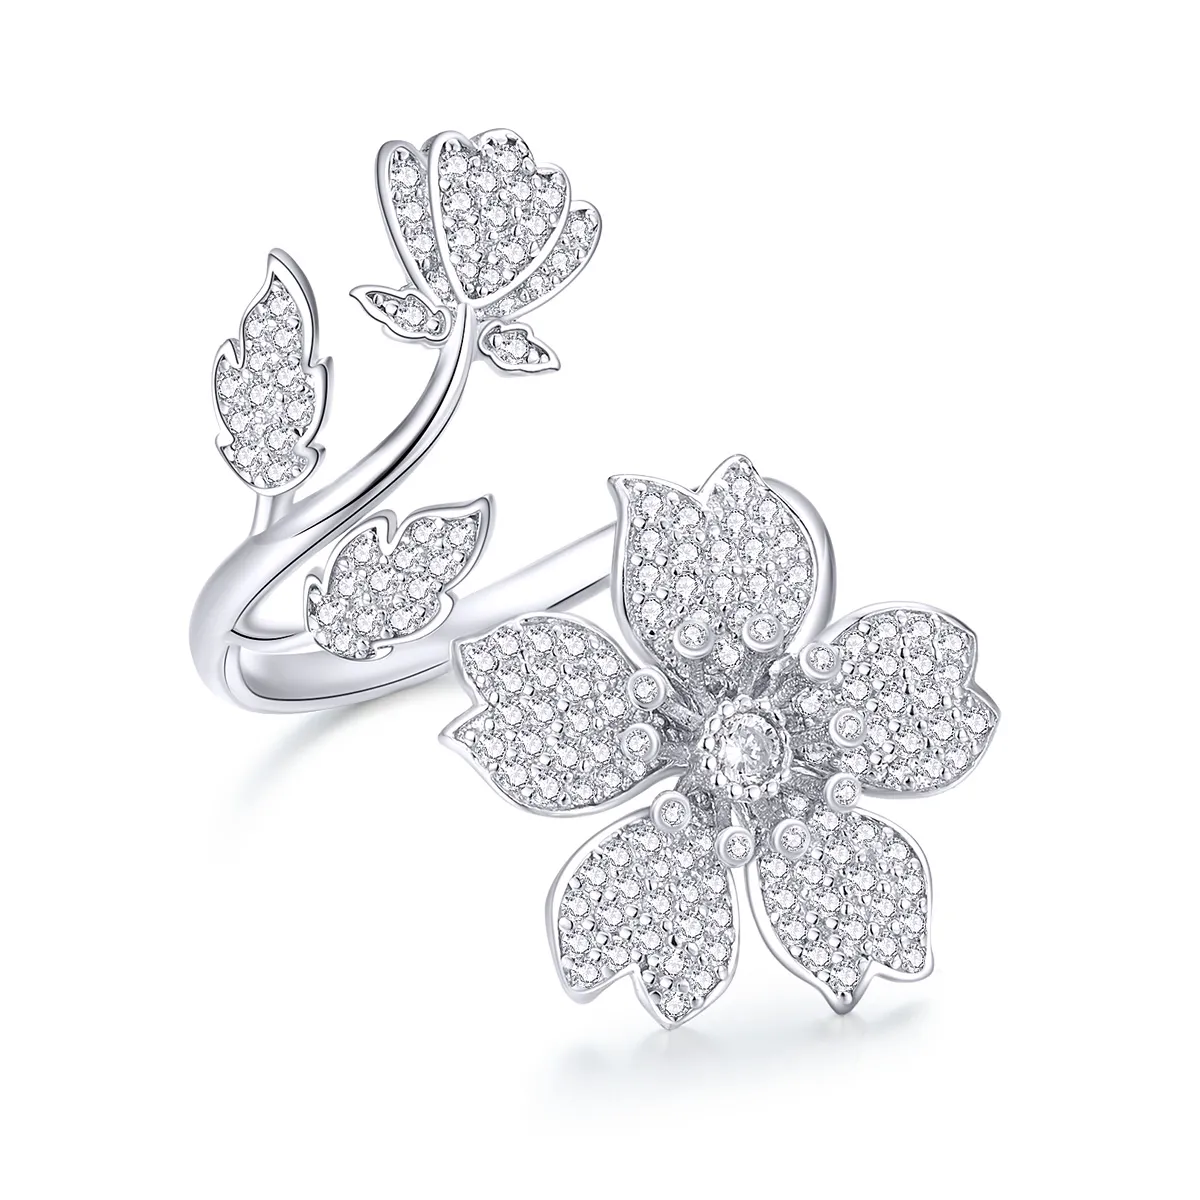 Pandora Style Cherry Blossoms Open Ring - BSR076